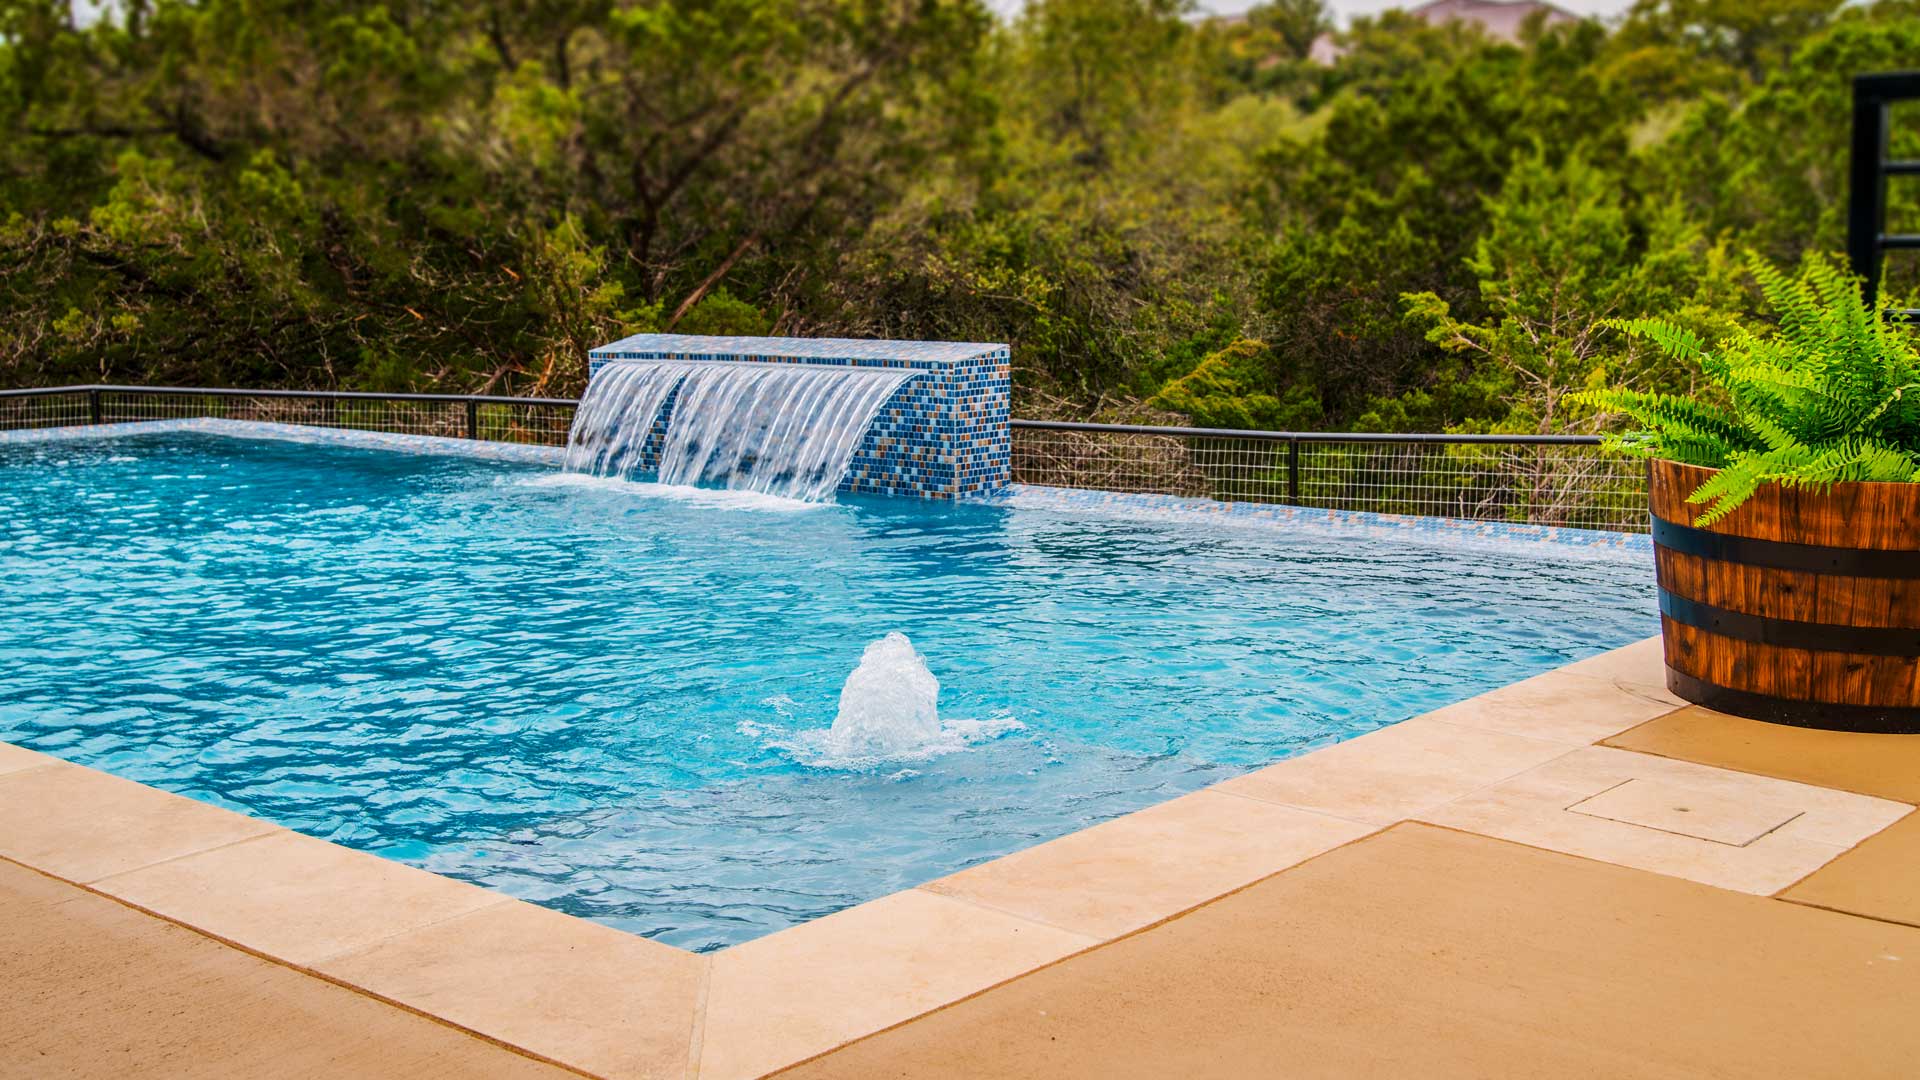 Waterfall feature in pool